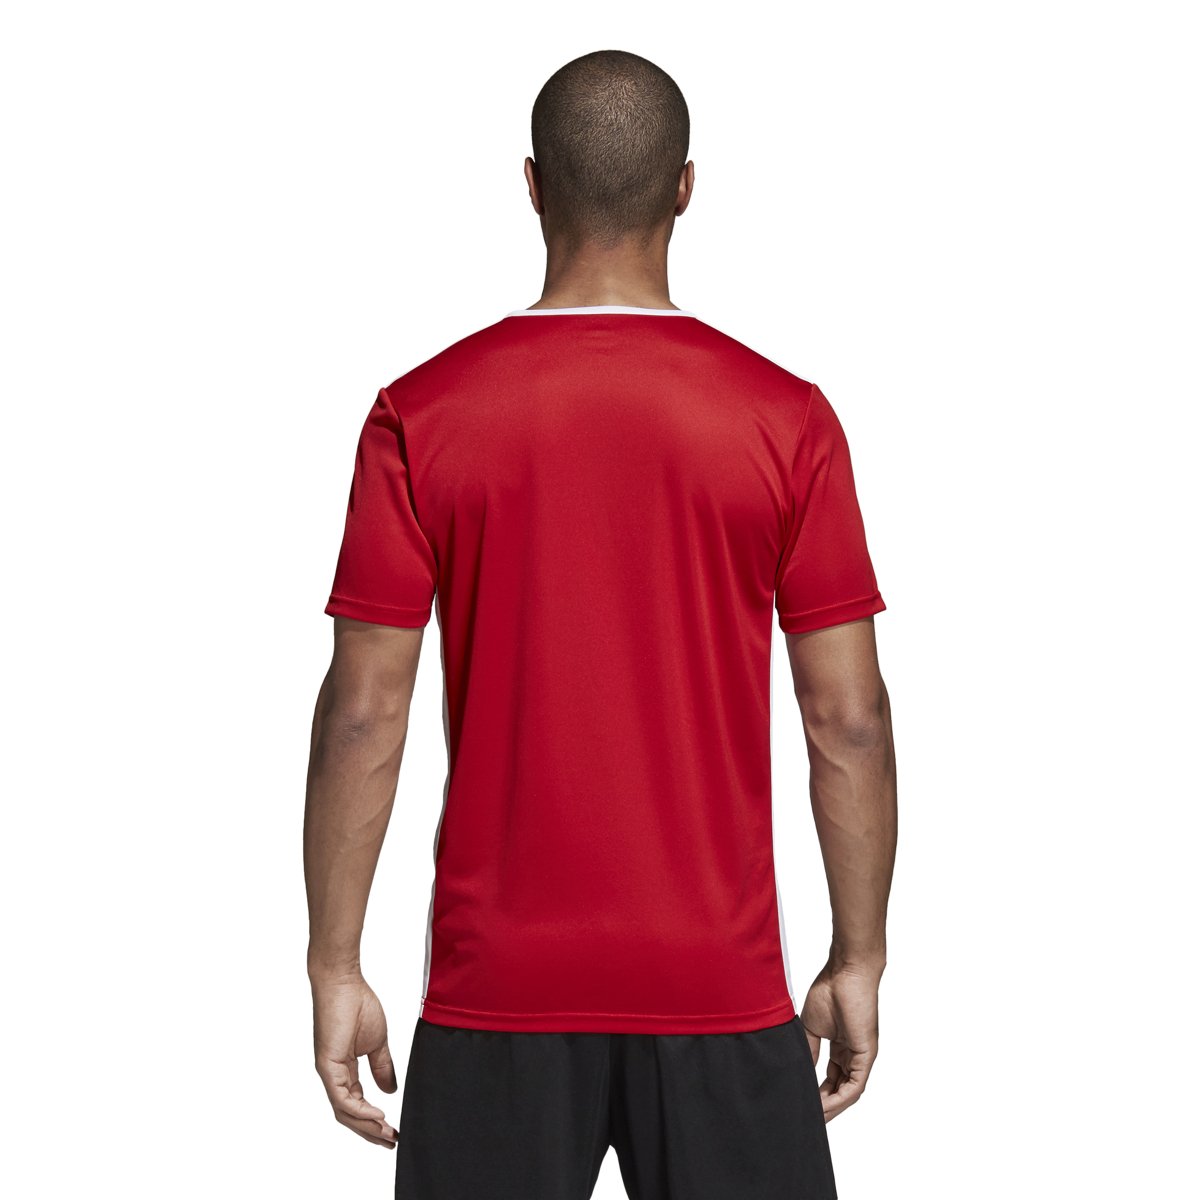 Men's Adidas Entrada 18 Soccer Jersey Red/White - XS - image 2 of 6